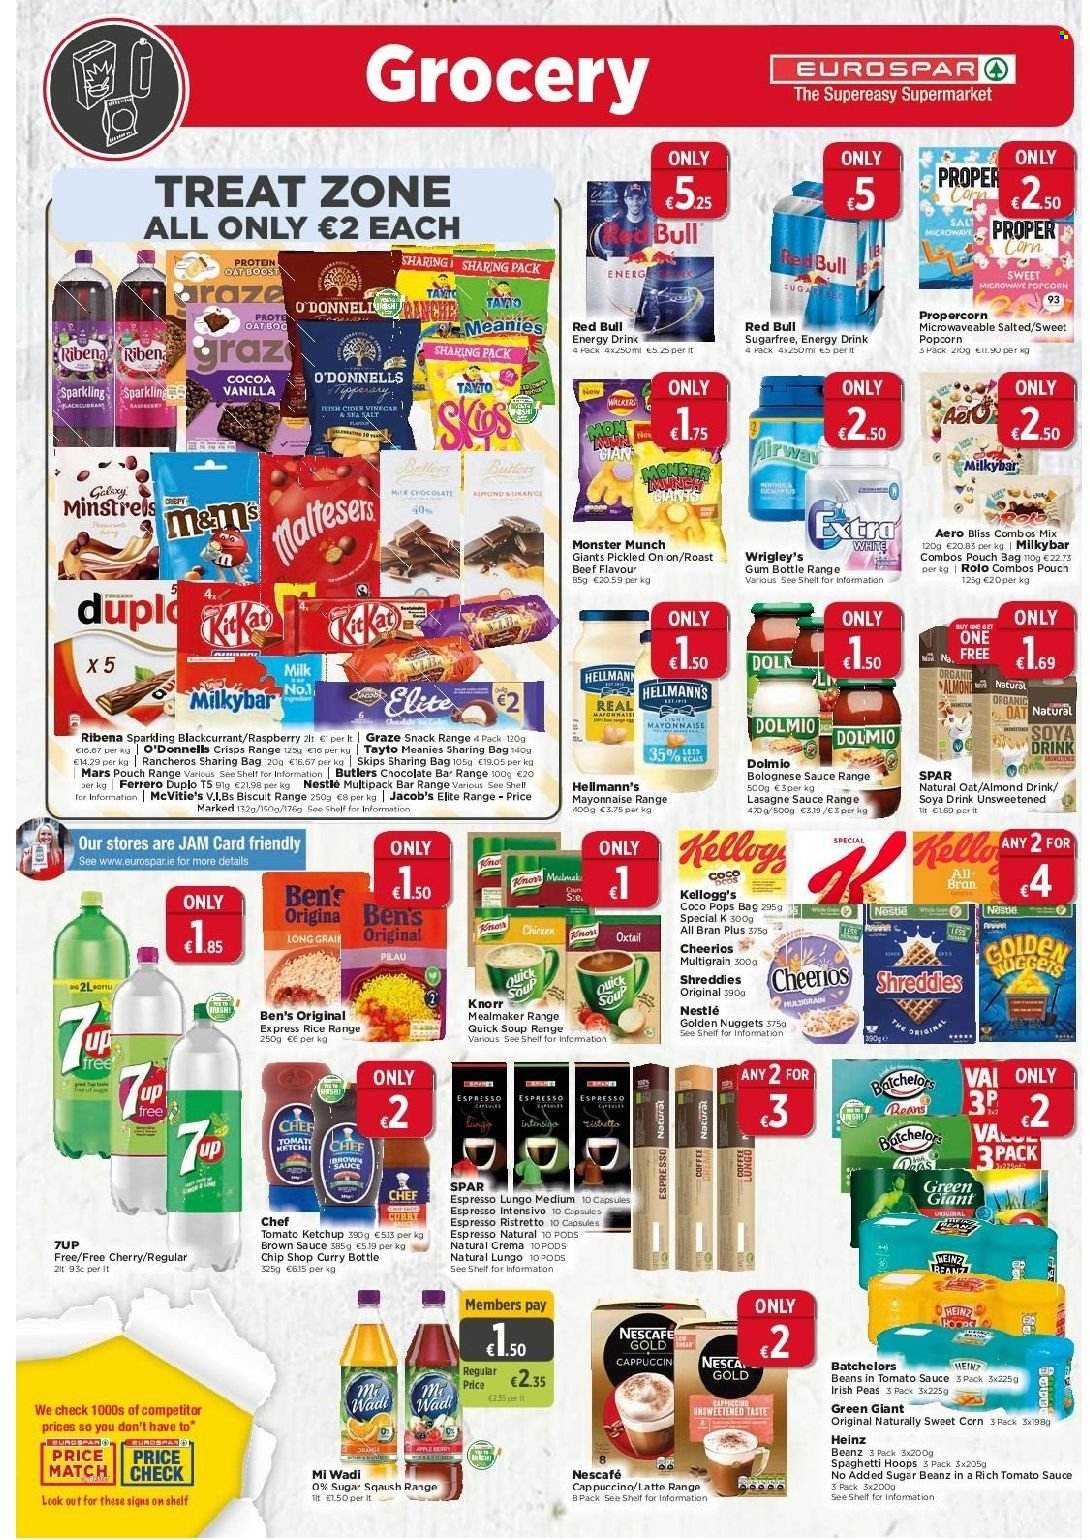 EUROSPAR offer  - 9.9.2021 - 29.9.2021 - Sales products - beans, corn, peas, sweet corn, cherries, spaghetti, soup, nuggets, Knorr, bolognese sauce, milk, mayonnaise, Hellmann’s, Nestlé, chocolate, snack, Ferrero Rocher, Mars, Monster Munch, Kellogg's, biscuit, Milky bar, TAYTO, popcorn, cocoa, oats, Heinz, Cheerios, coco pops, rice, ketchup, brown sauce, jam, Graze, energy drink, Monster, 7UP, Red Bull, Boost, cappuccino, Nescafé, Intenso, cider, beef meat, oxtail, roast beef. Page 6.